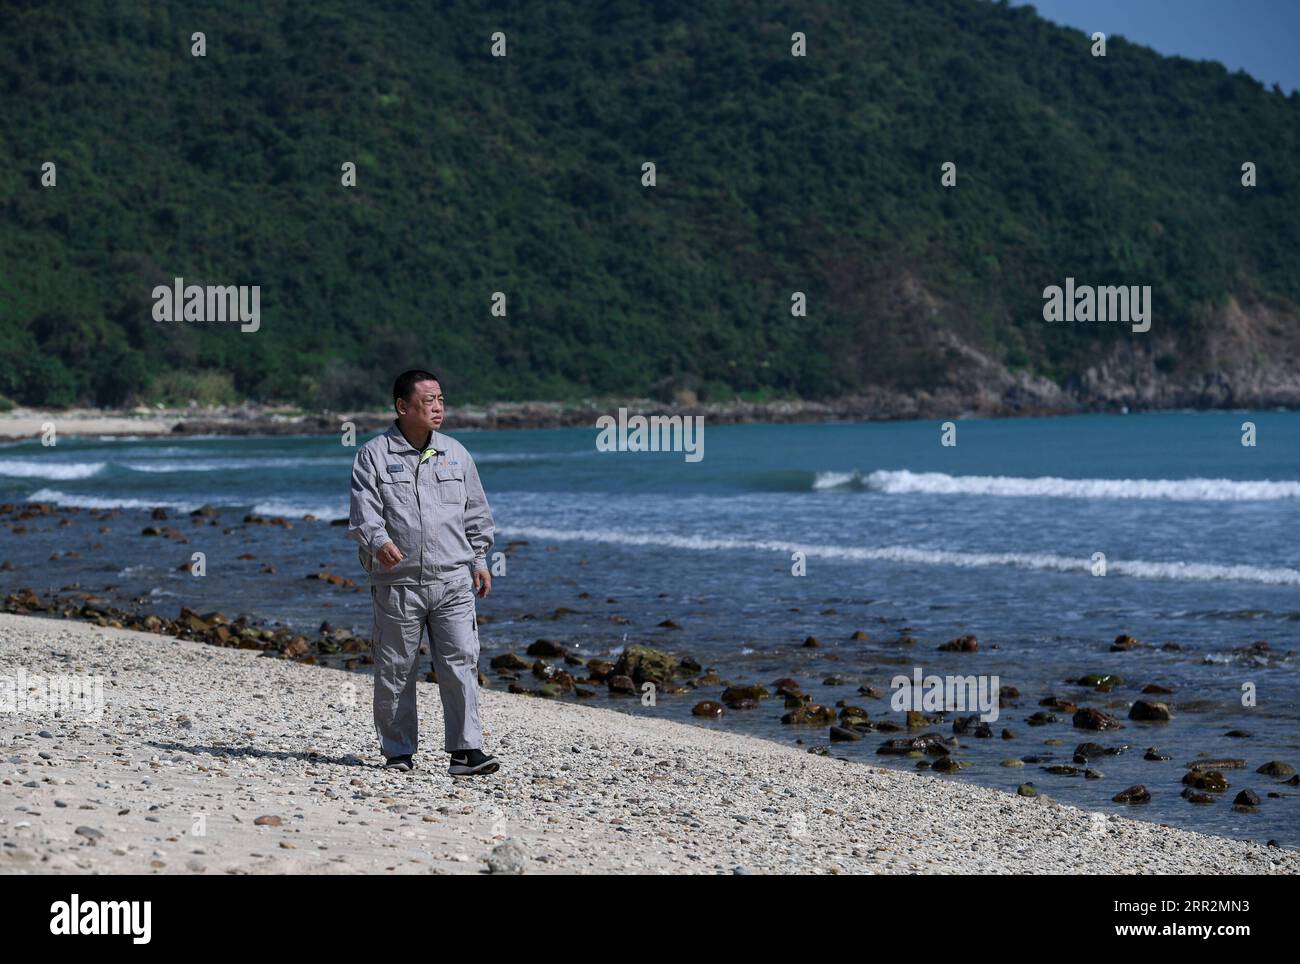 201014 -- SHENZHEN, Oct. 14, 2020 -- Qiao Sukai walks on the beach in Shenzhen, south China s Guangdong Province, Nov. 20, 2019. Every 18 months, the Dayawan Nuclear Power Plant has to undergo a fuel assemblies replacement, which is one of the most important moments for the nuclear power plant. Dozens of engineers are divided into four shifts and operate the equipment day and night when the reactor is shut down. Their leader, Qiao Sukai, has been dealing with nuclear fuel since July 1993 when the nuclear fuel assembly of Dayawan Nuclear Power Plant arrived. The professional and technical maint Stock Photo